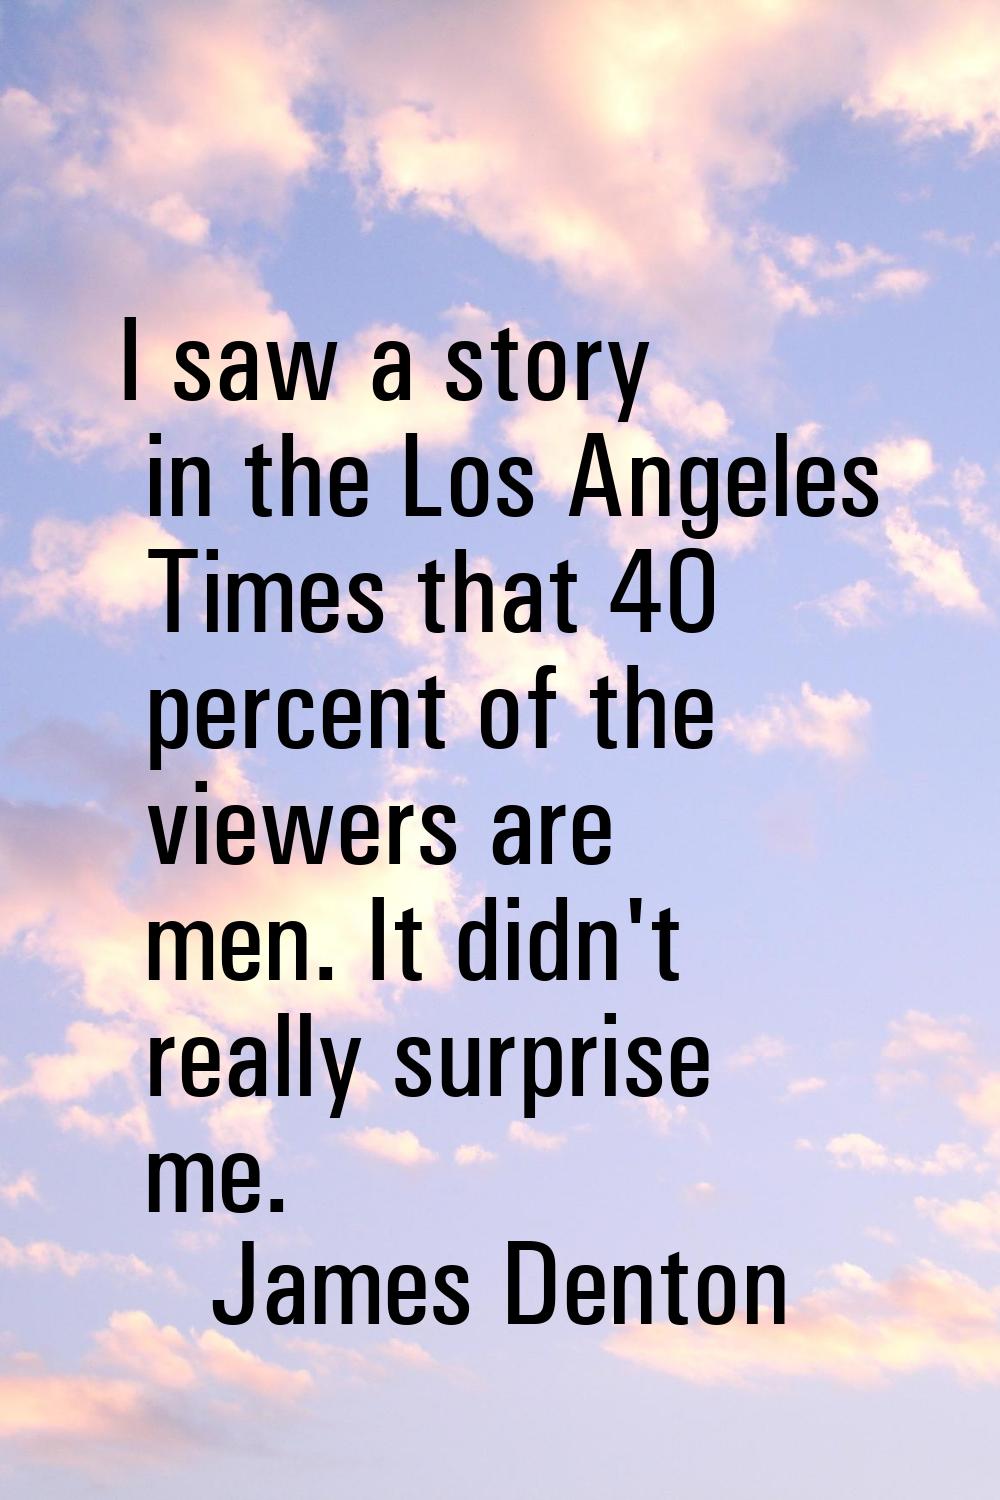 I saw a story in the Los Angeles Times that 40 percent of the viewers are men. It didn't really sur